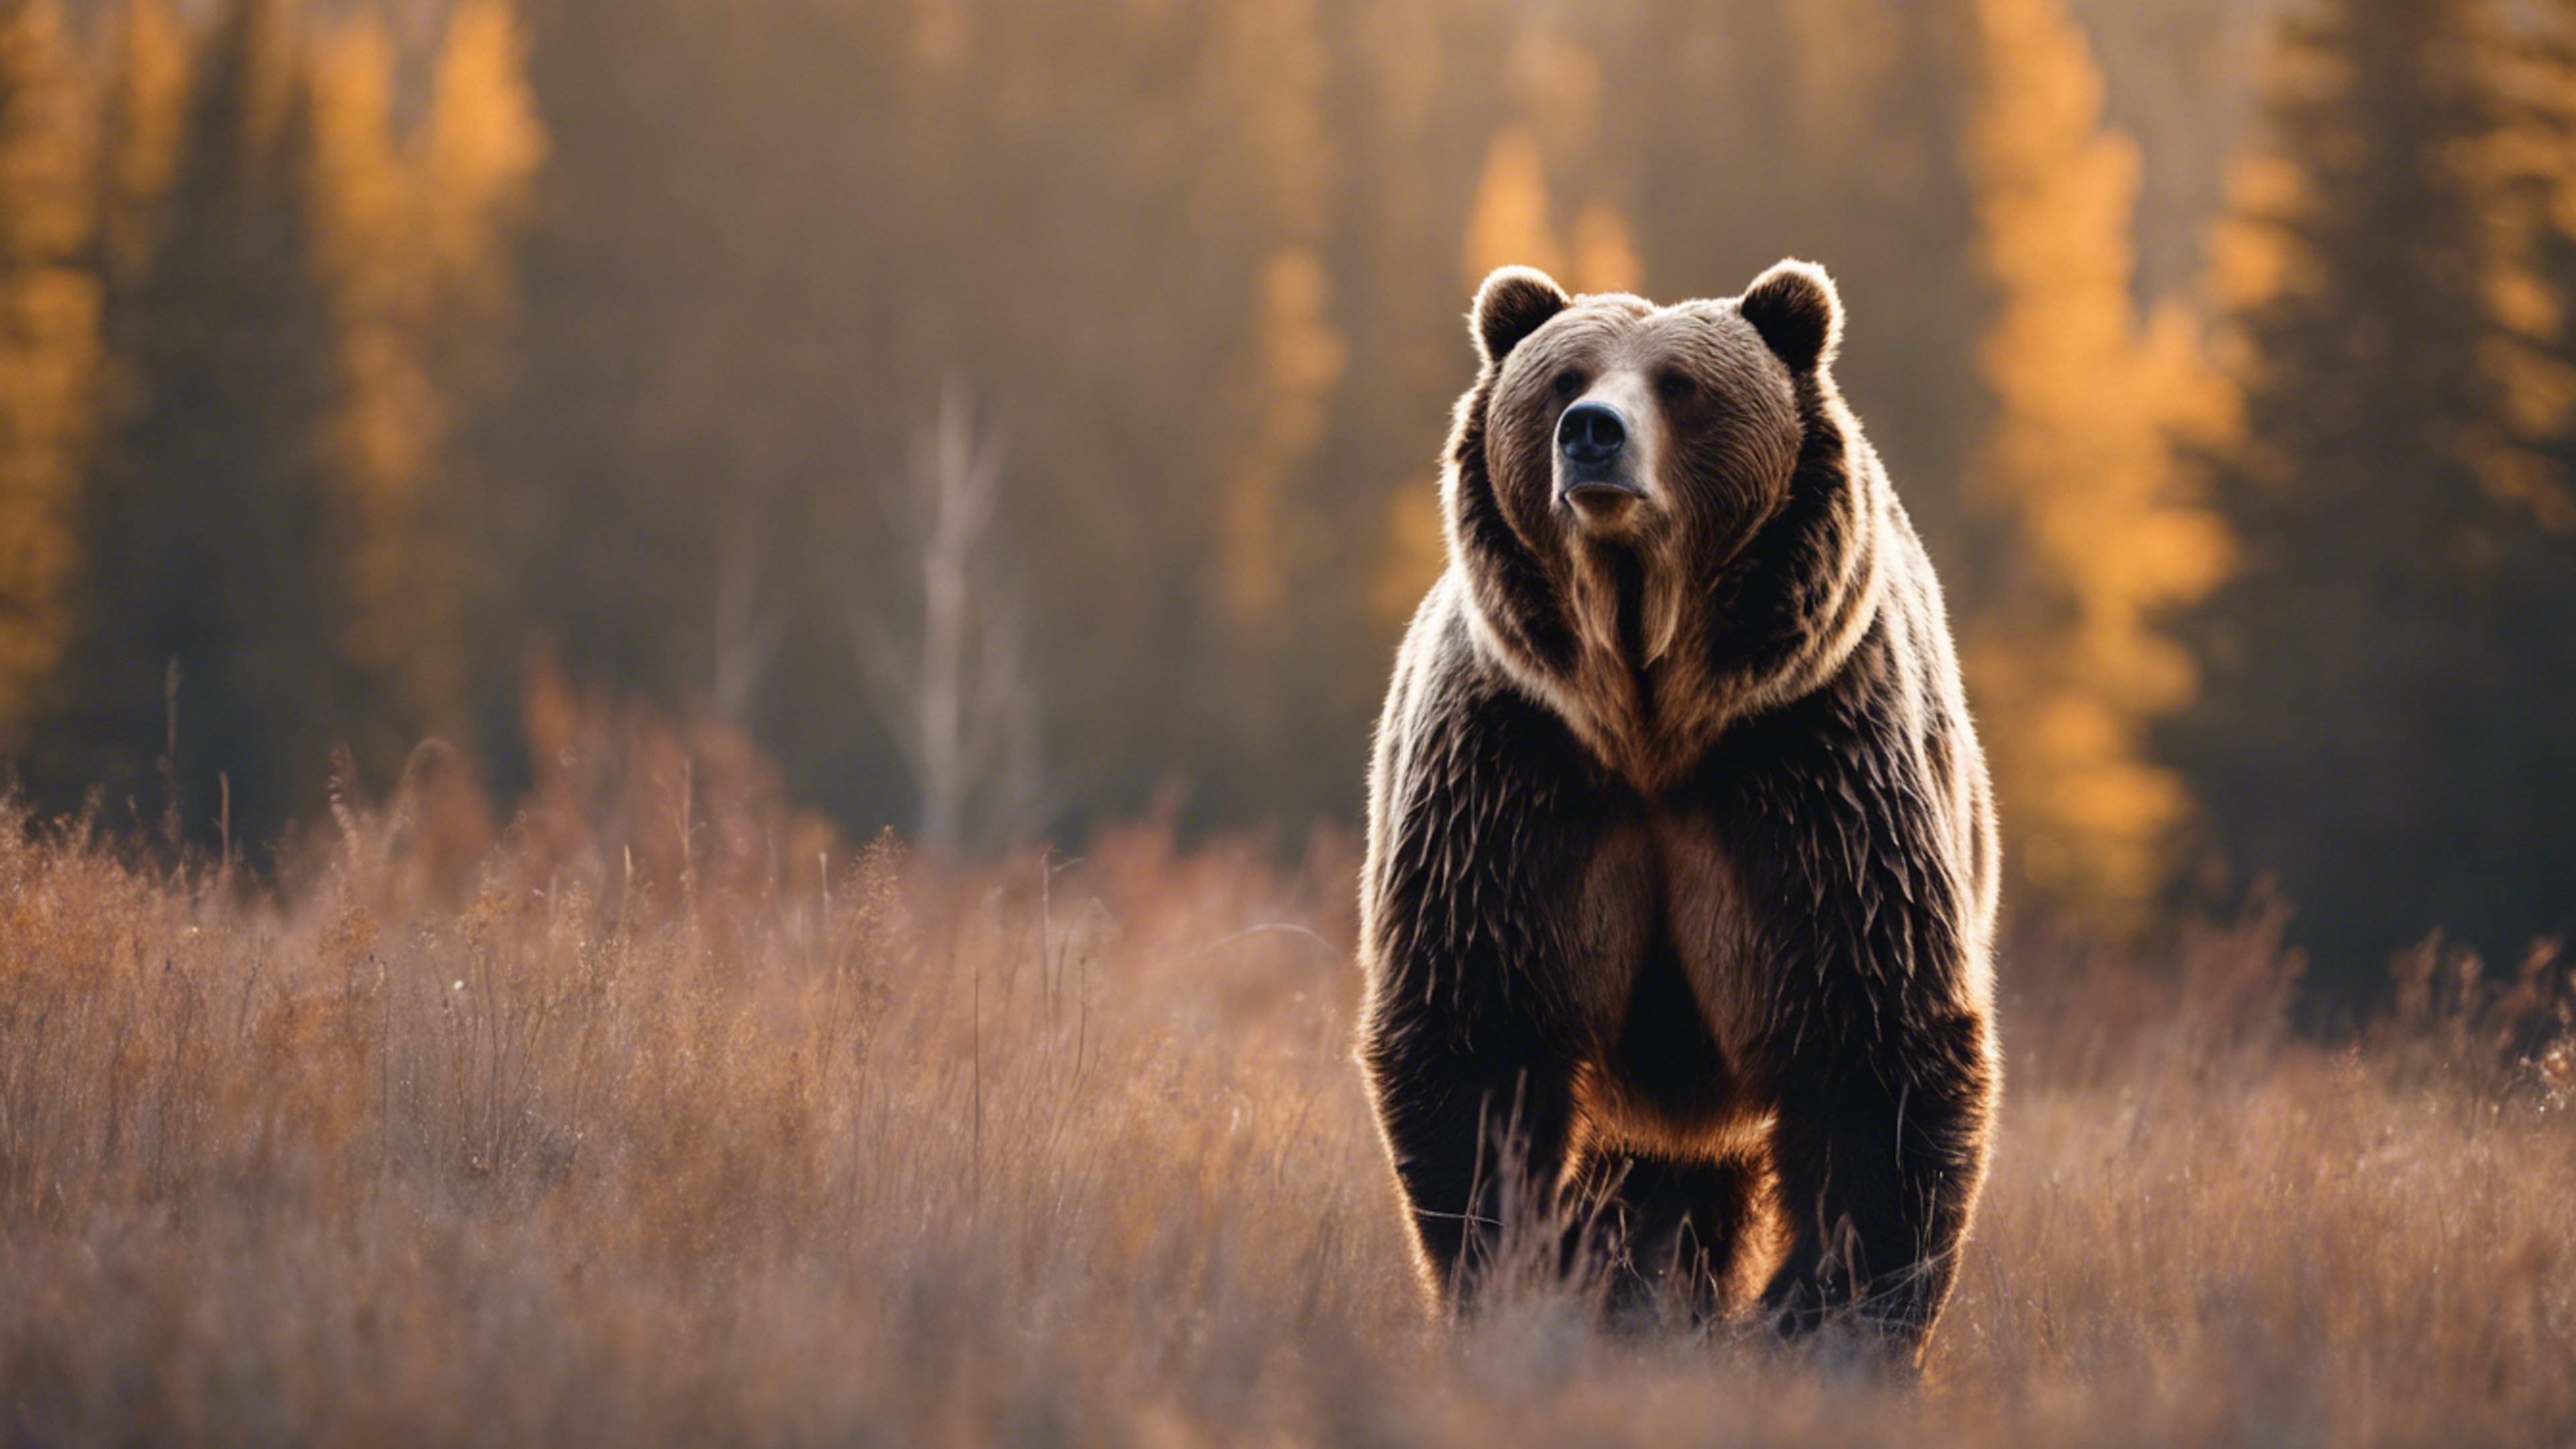 A majestic brown grizzly bear standing tall in the wild วอลล์เปเปอร์[4fb1e3b24f2c4984aff0]